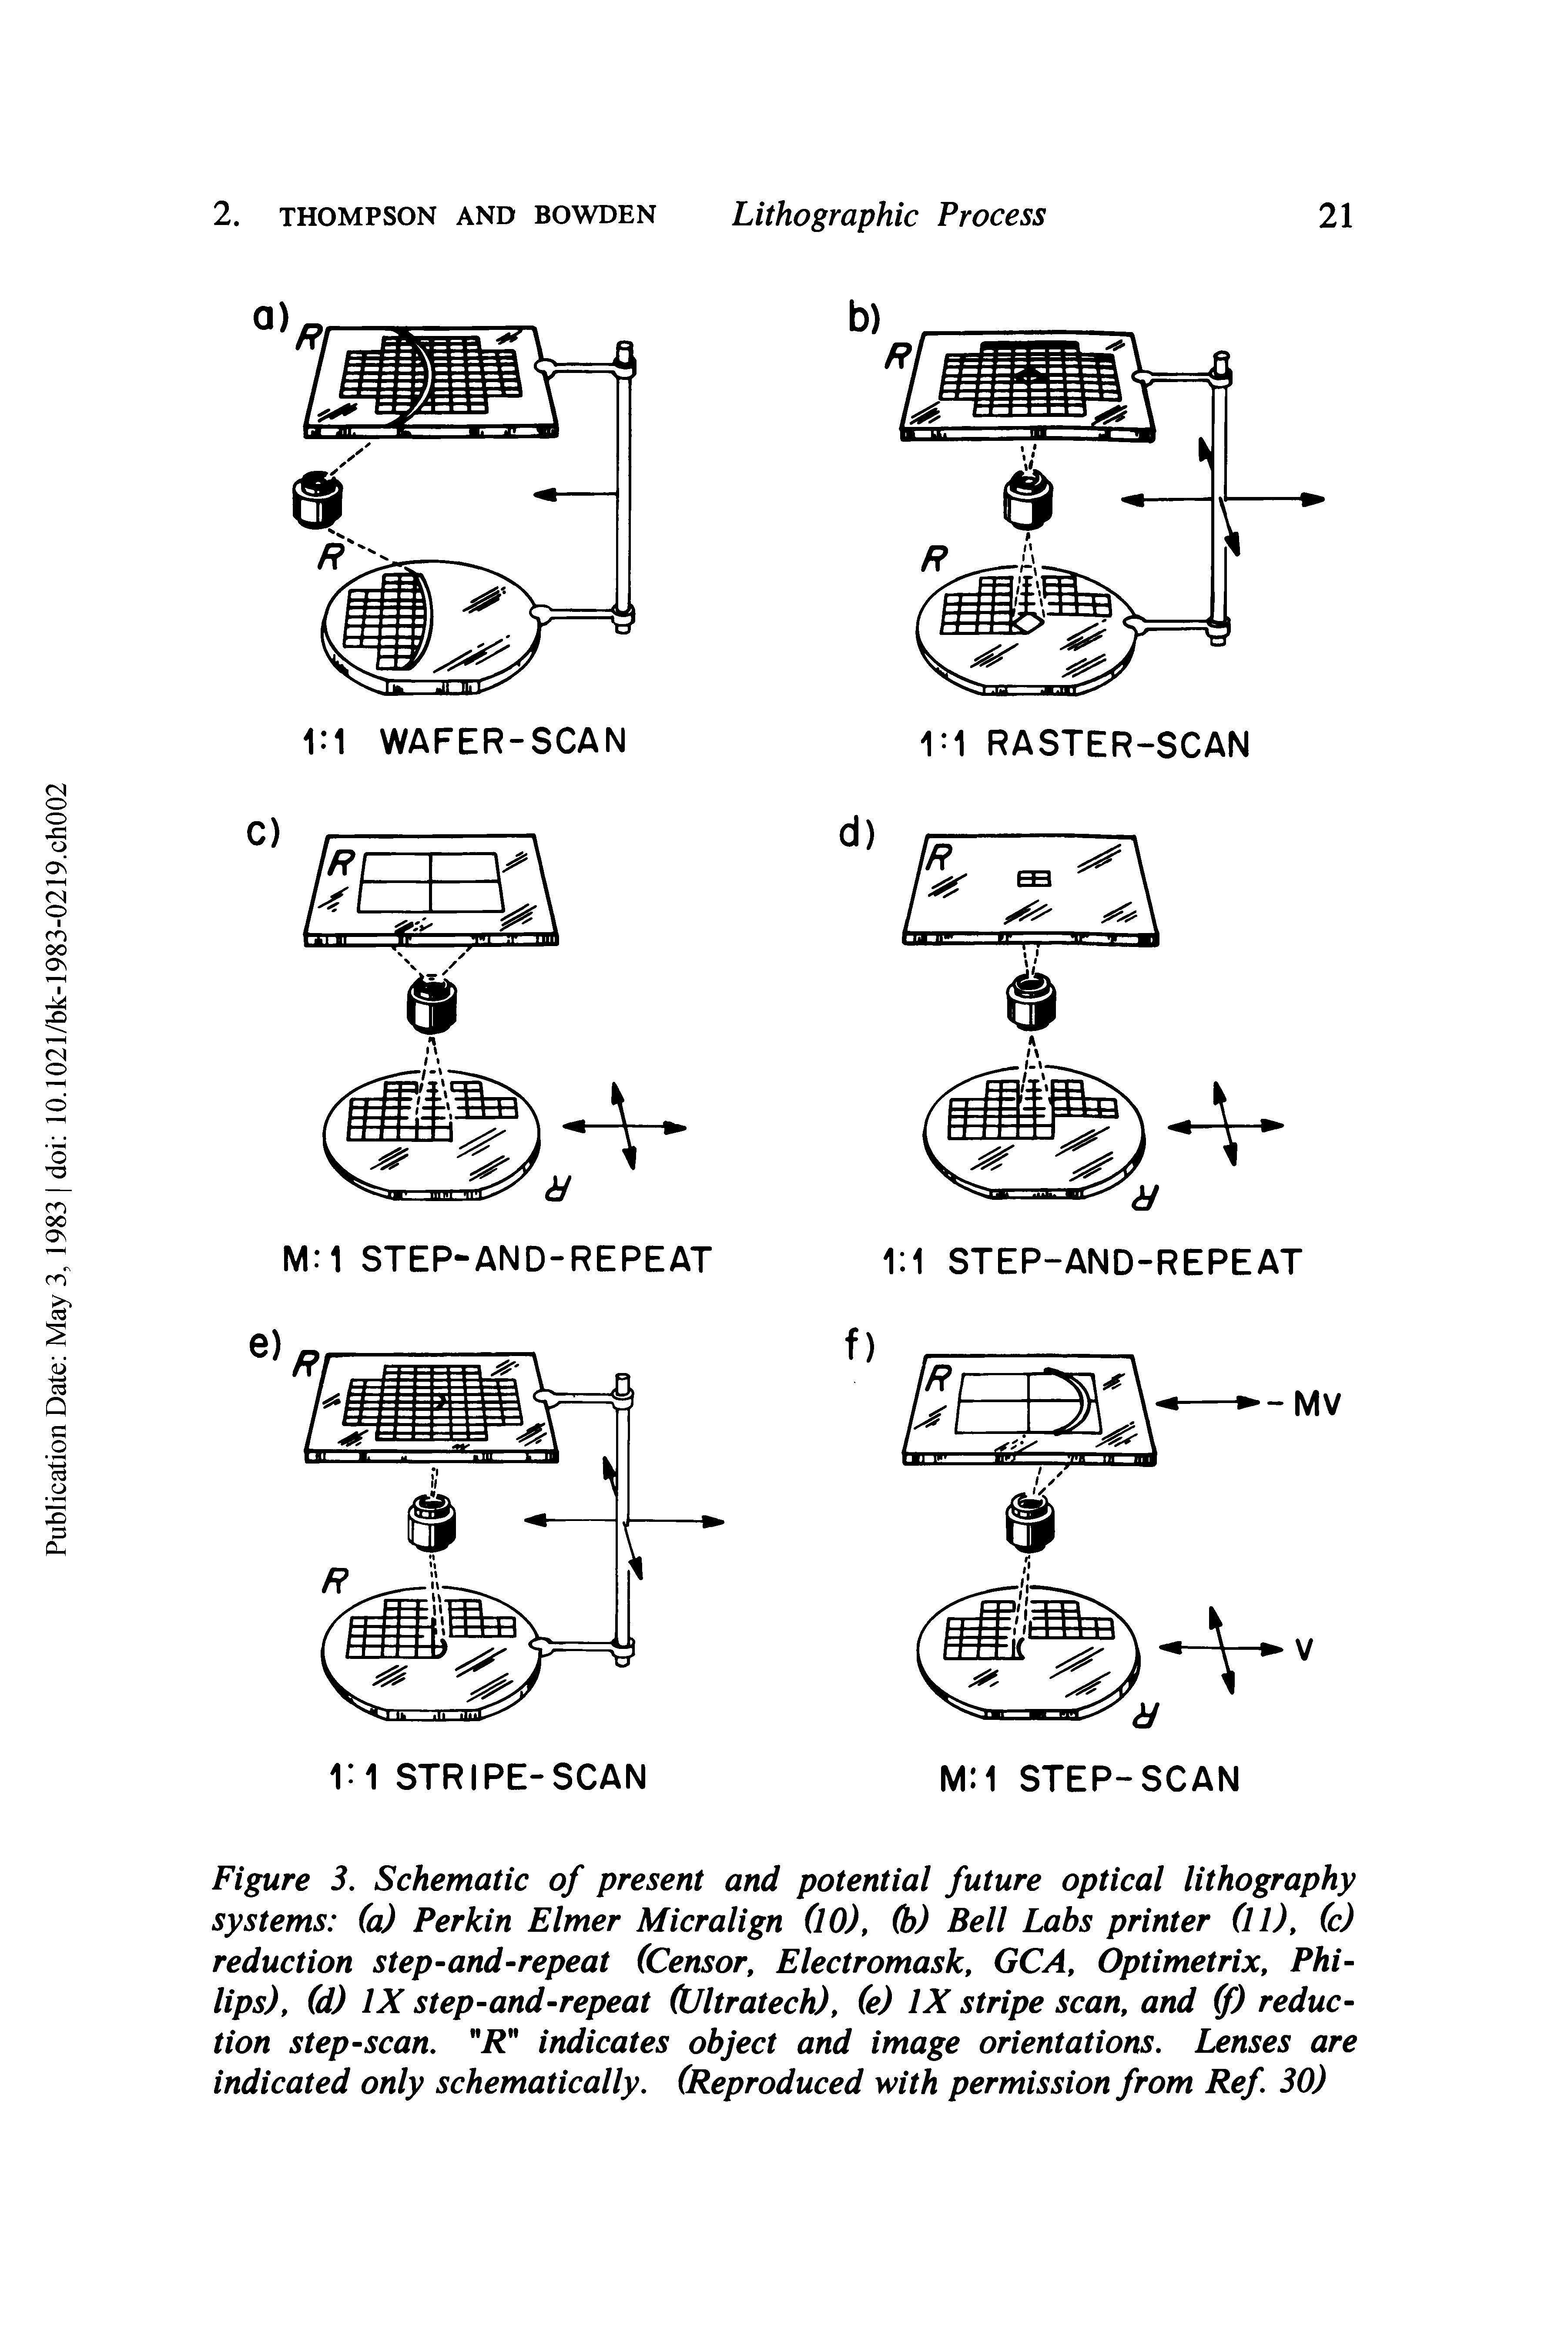 Figure 3. Schematic of present and potential future optical lithography systems (a) Perkin Elmer Micralign (10), (b) Bell Labs printer (11), (c) reduction step-and-repeat (Censor, Electromask, GCA, Optimetrix, Philips), (d) IX step-and-repeat (Ultratech), (e) IX stripe scan, and (f) reduction step-scan, R indicates object and image orientations. Lenses are indicated only schematically. (Reproduced with permission from Ref. 30)...